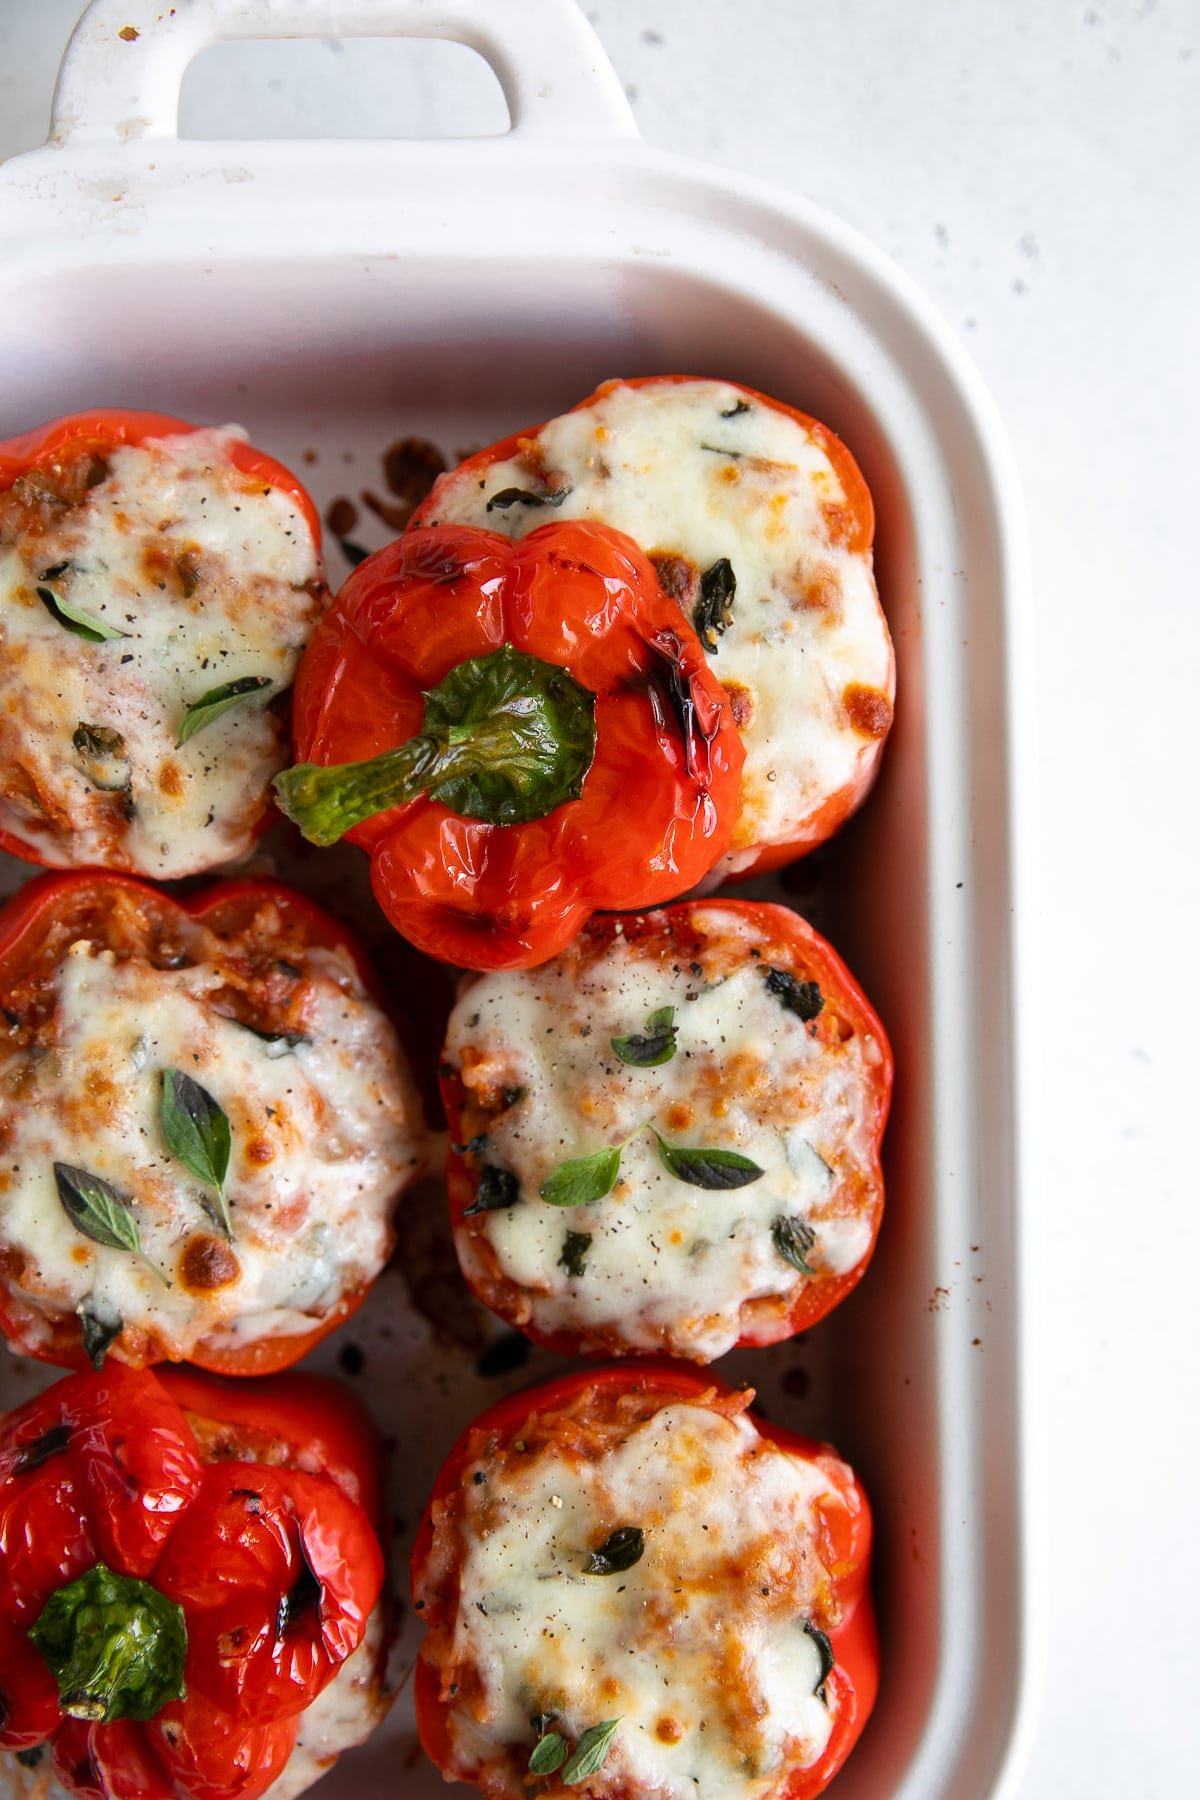 Stuffed and baked red bell peppers topped with mozzarella cheese and fresh oregano.